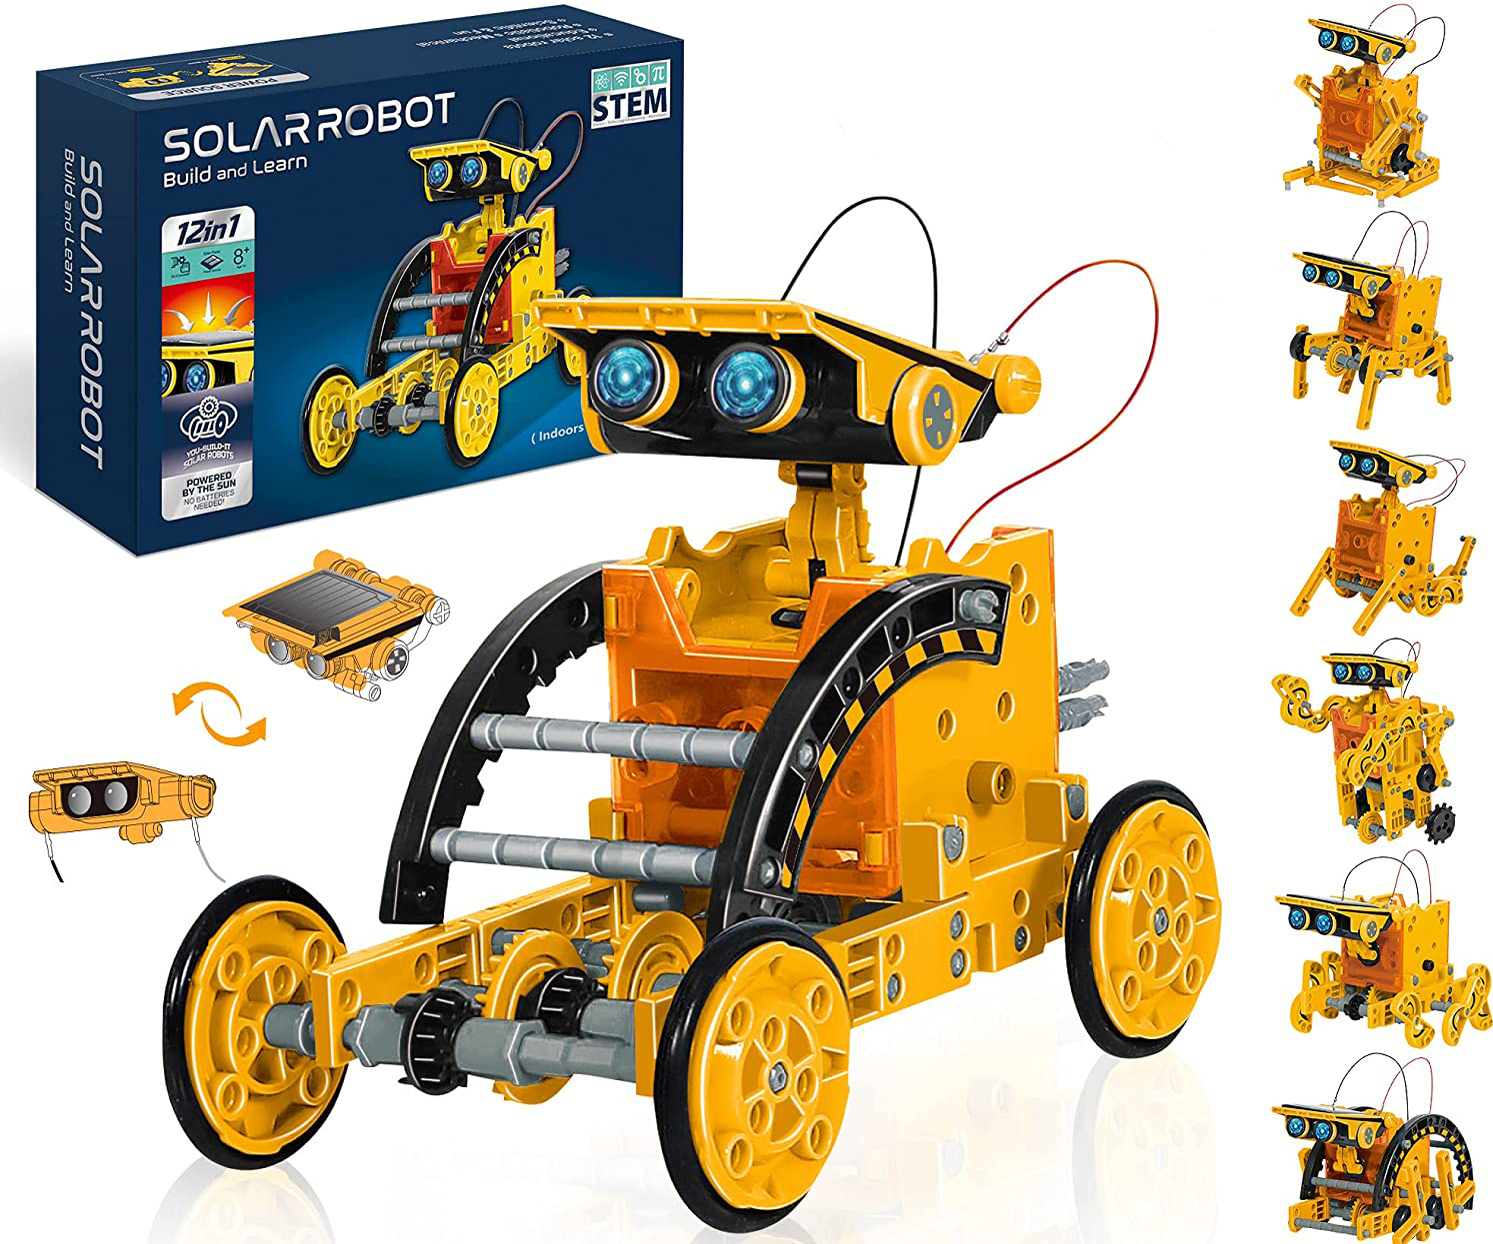 200 Pieces STEM Toys 7-in-1 Solar Robot Kits Space Toys DIY Building Set Science Experiment Kit Engineer Building Activities for Kids Learning & Education Toys Powered by The Sun